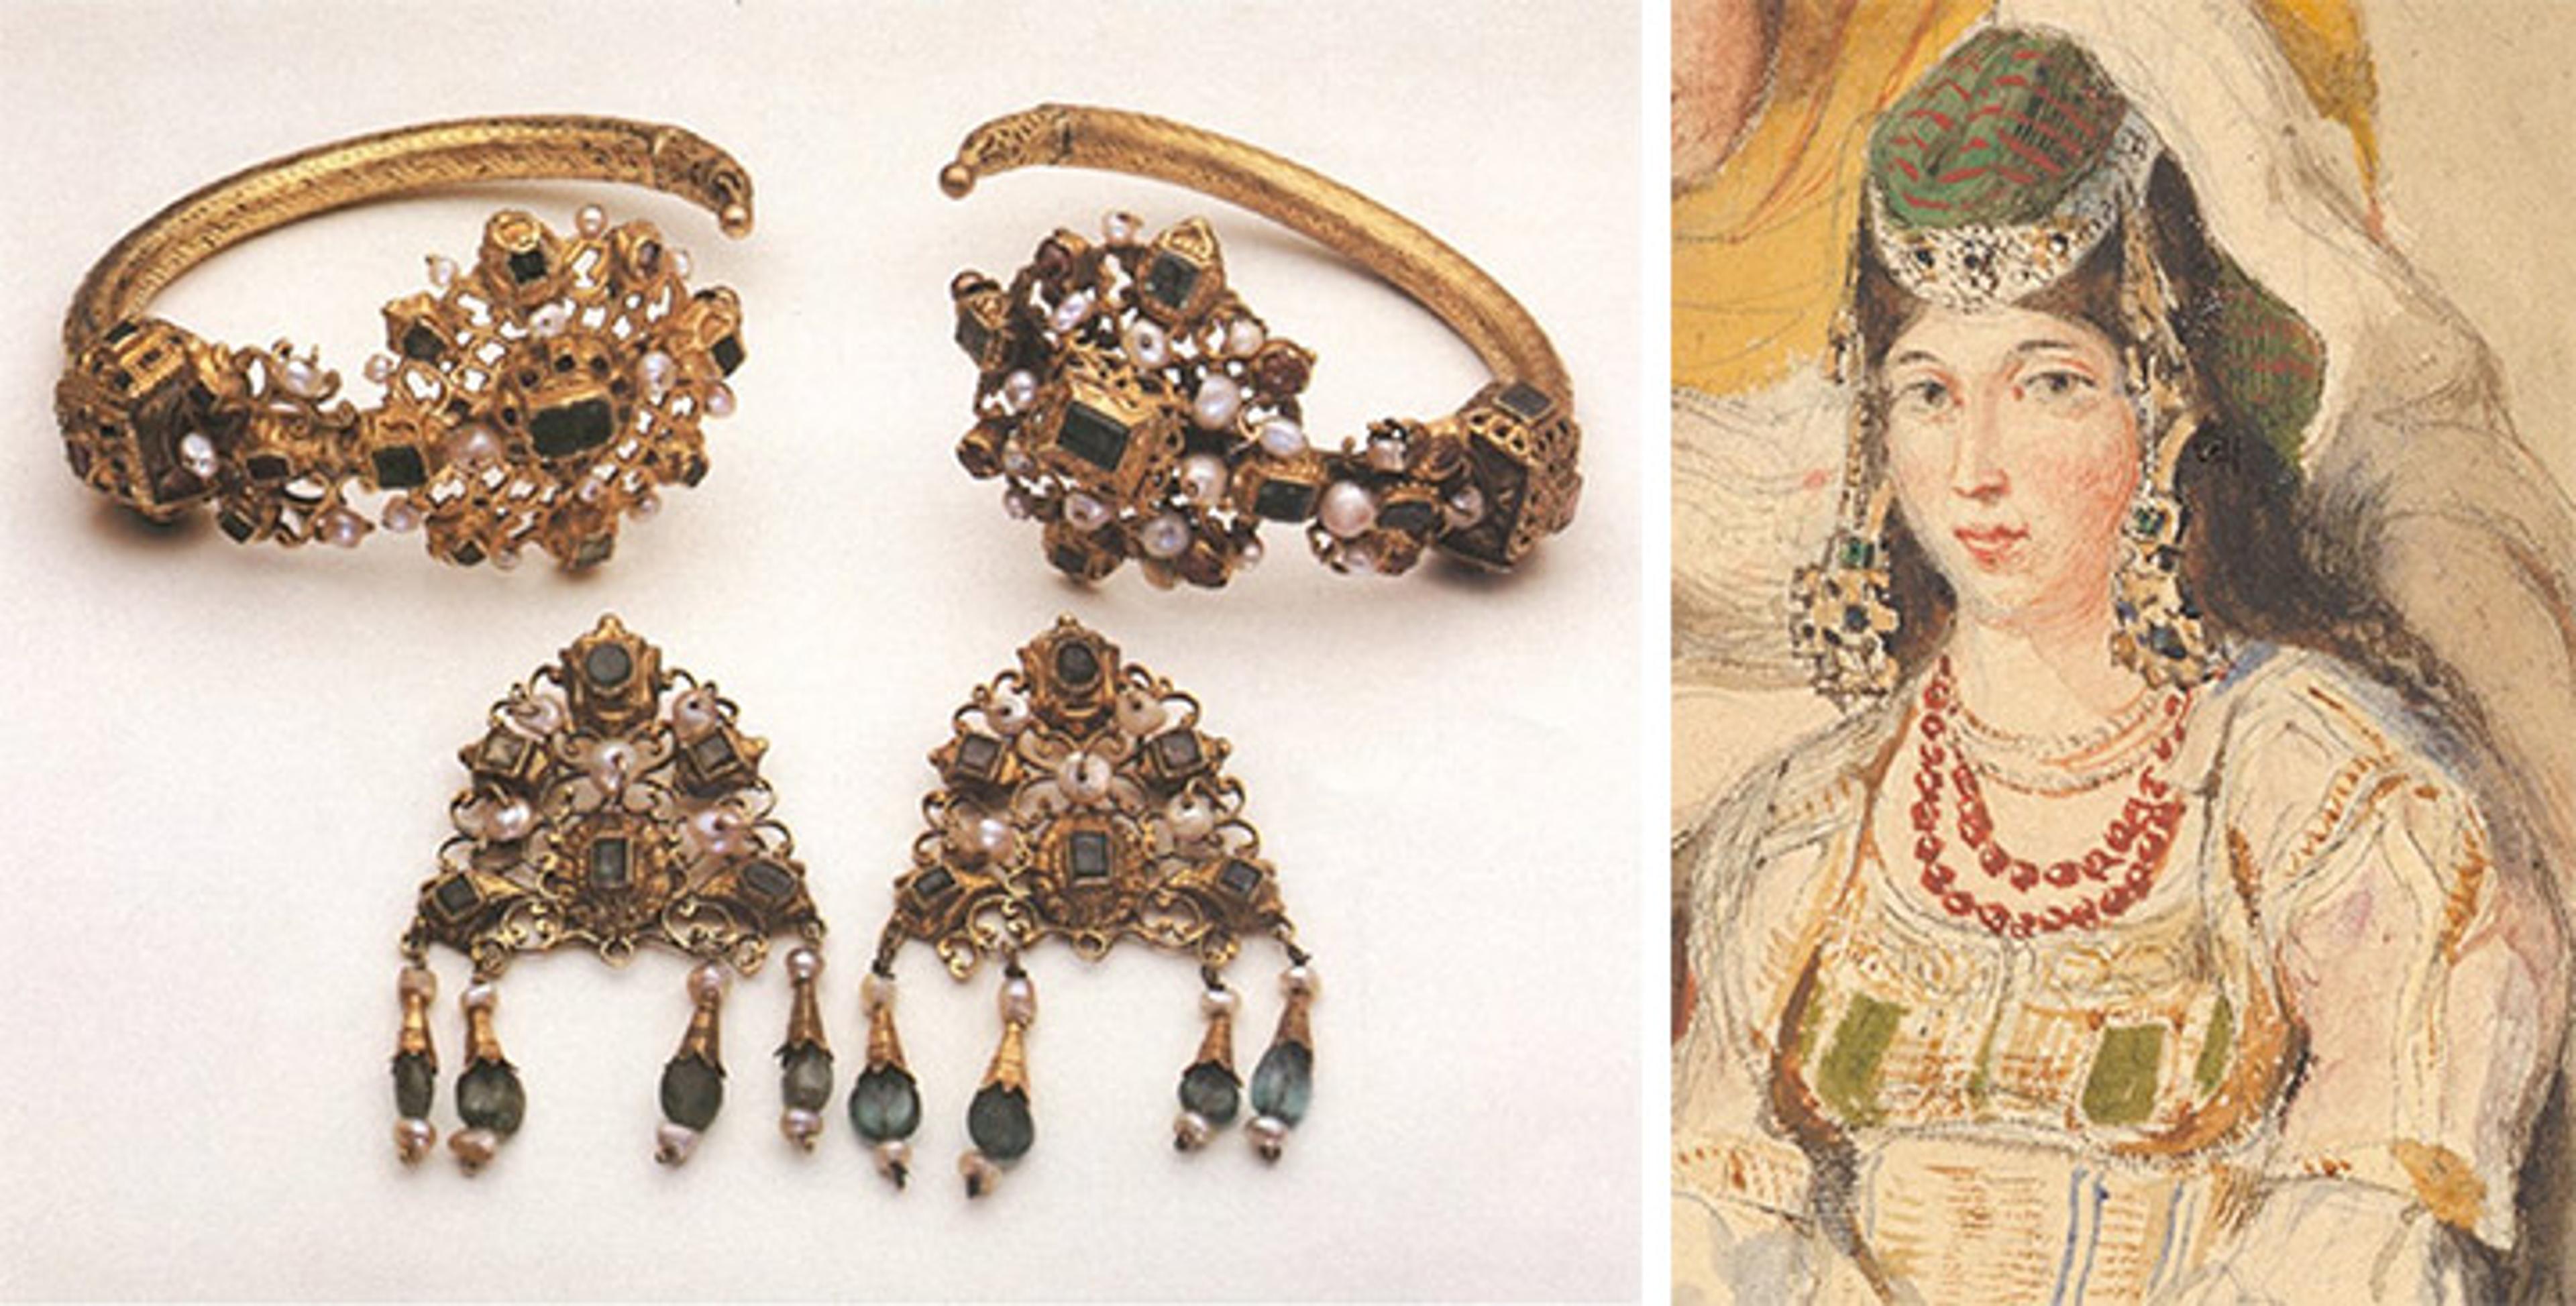 Left: Gold head ornaments. RIght: Watercolor by Delacroix of woman wearing head ornaments